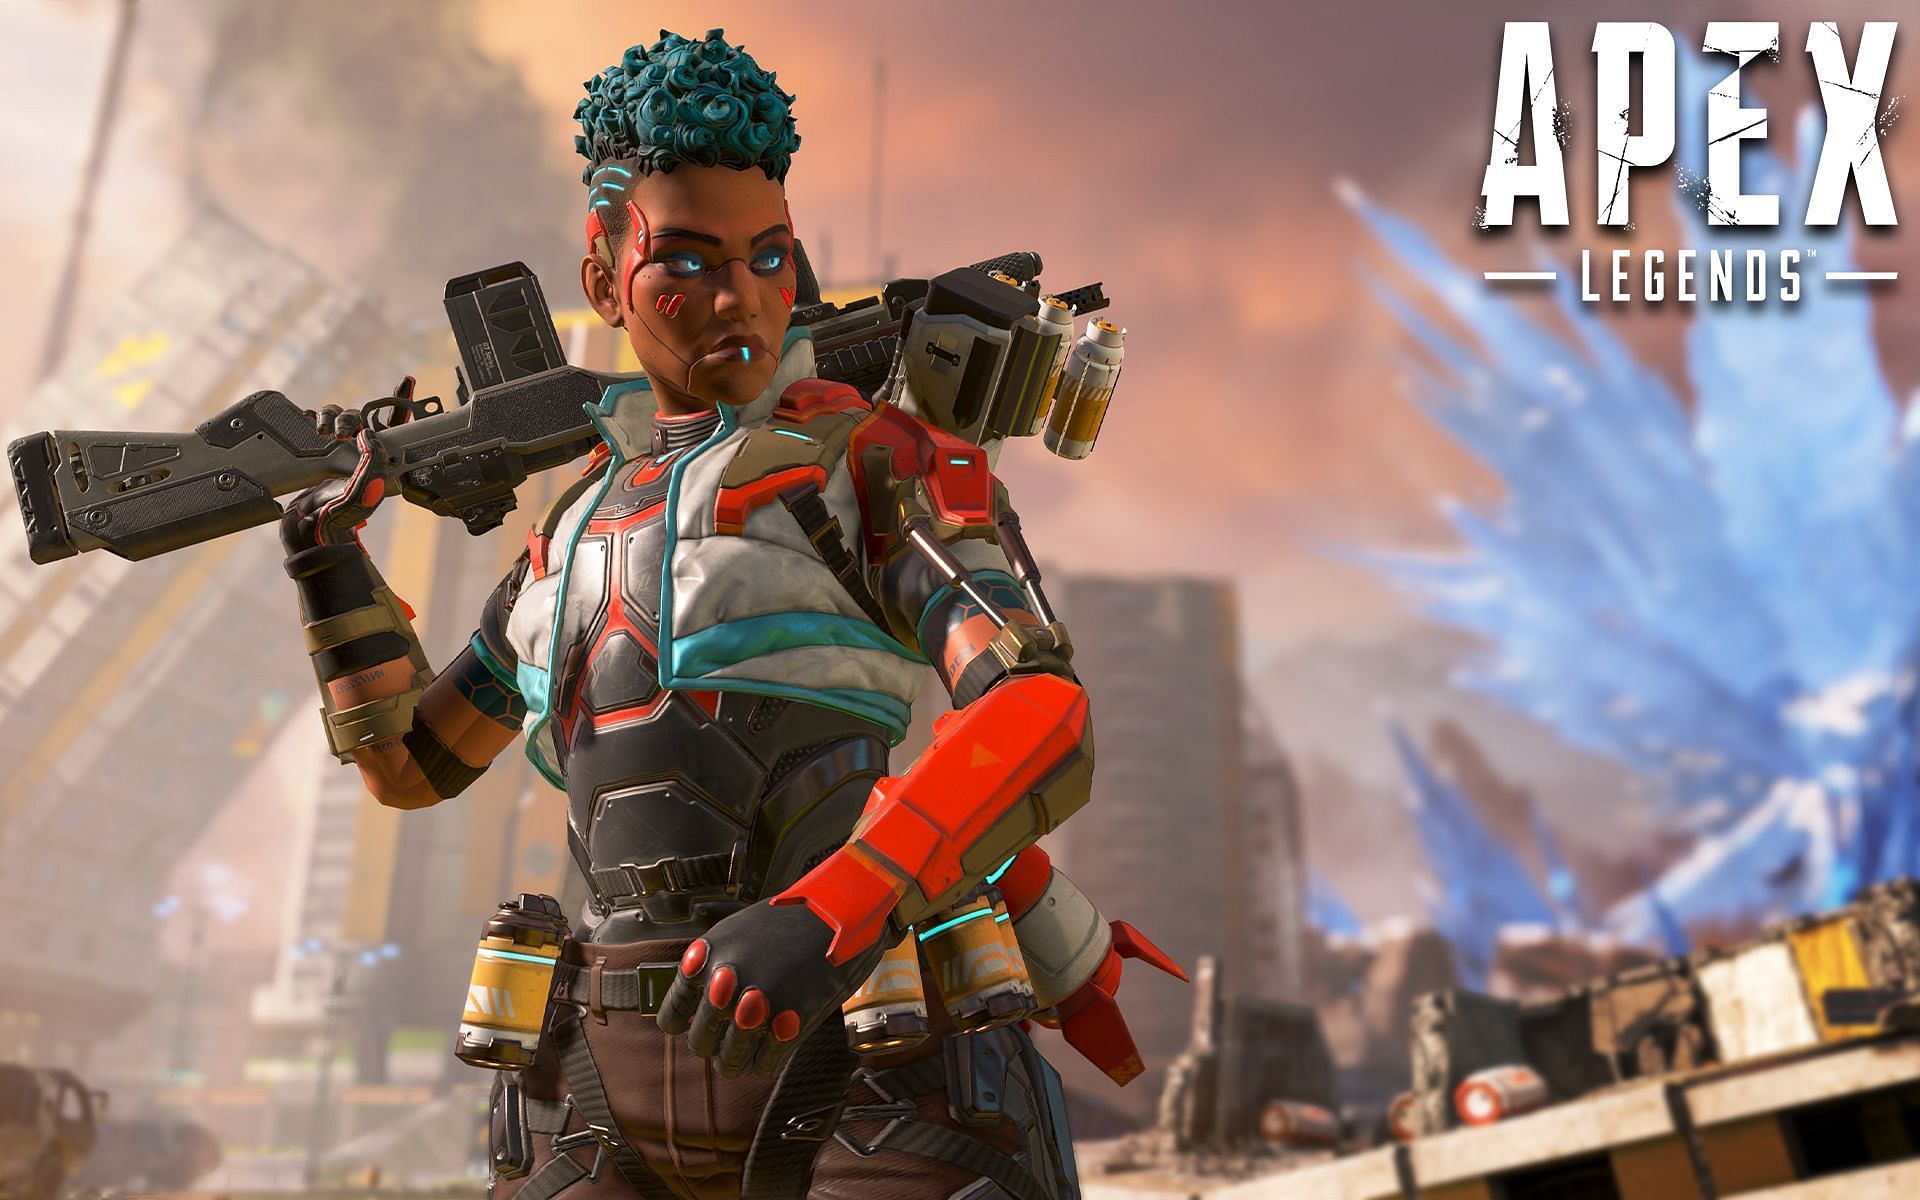 Bangalore is one of the most versatile characters in Apex Legends (Image via Respawn Entertainment)